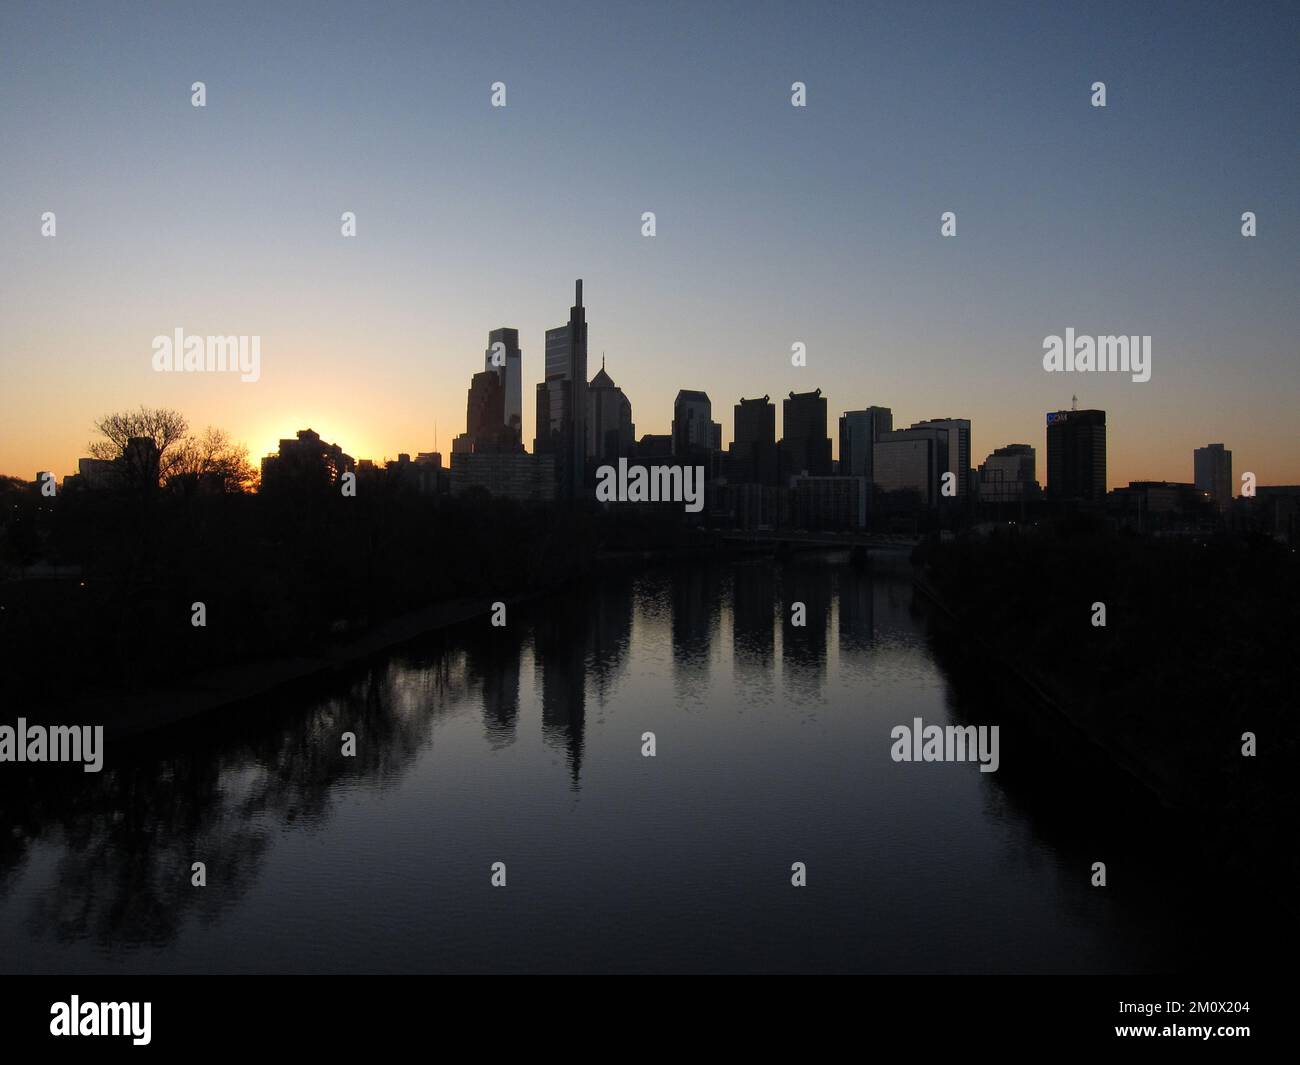 The Philadelphia skyline is seen silhouetted against the sunrise over the Schuylkill River. Stock Photo